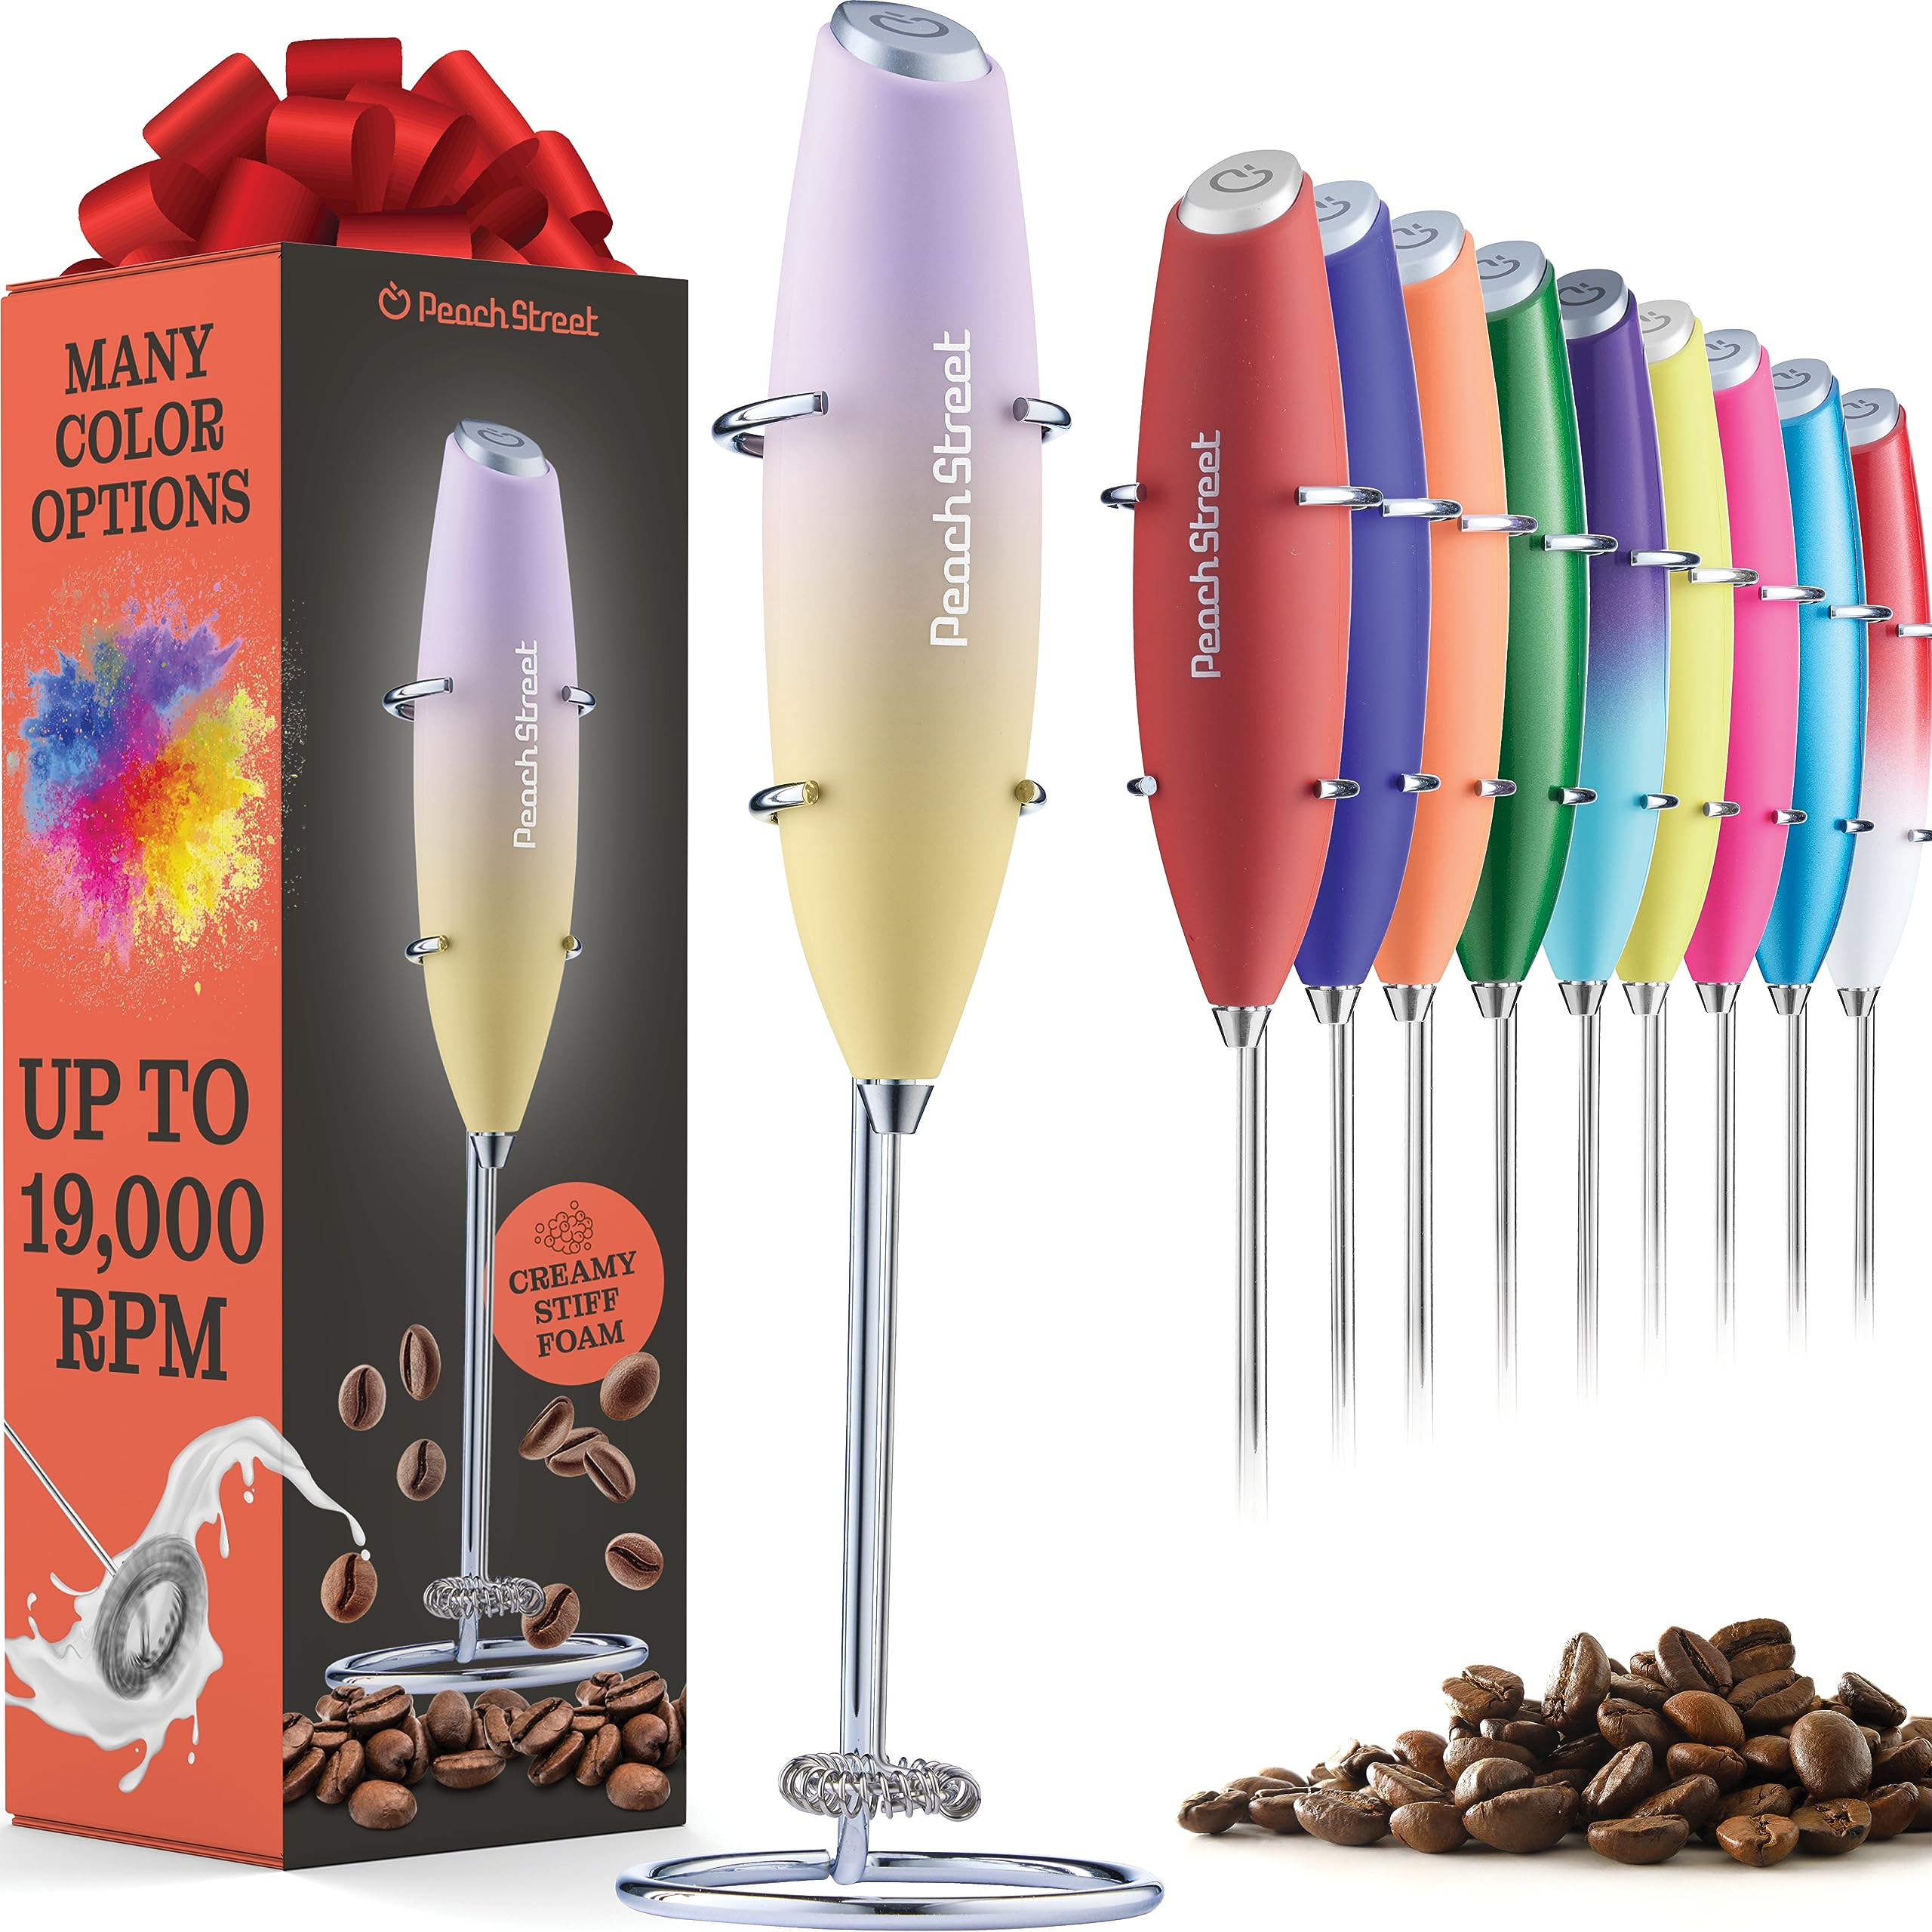 Powerful Handheld Milk Frother, Mini Milk Foamer, Battery Operated (Not included) Stainless Steel Drink Mixer with Frother Stand for Coffee, Lattes, Cappuccino, Frappe, Matcha, Hot Chocolate Lavender Banana